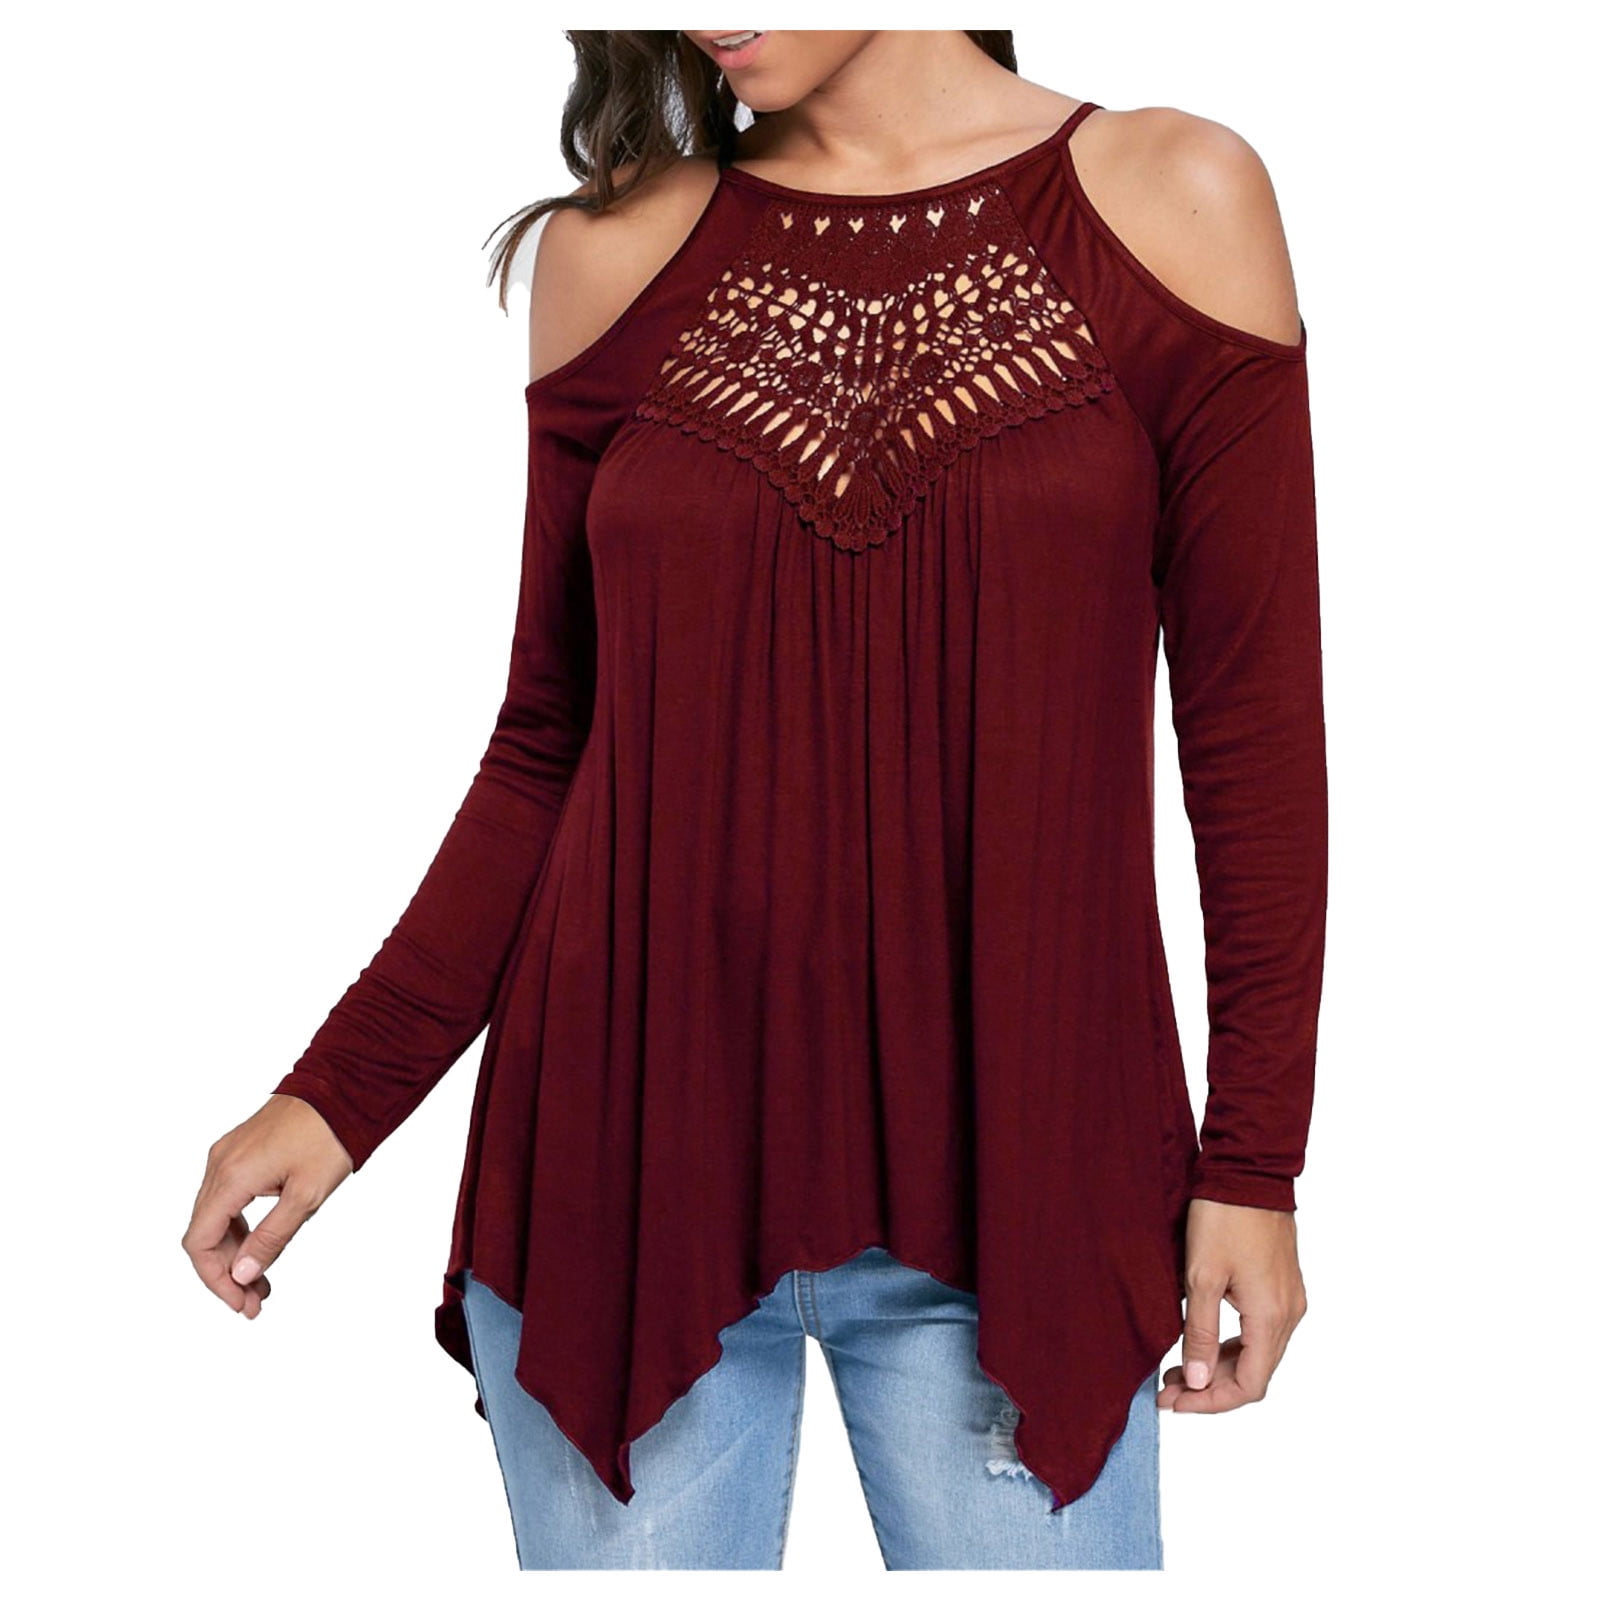 XFLWAM Womens Cold Shoulder Long Sleeve Tops Casual Fall Lace T Shirts ...